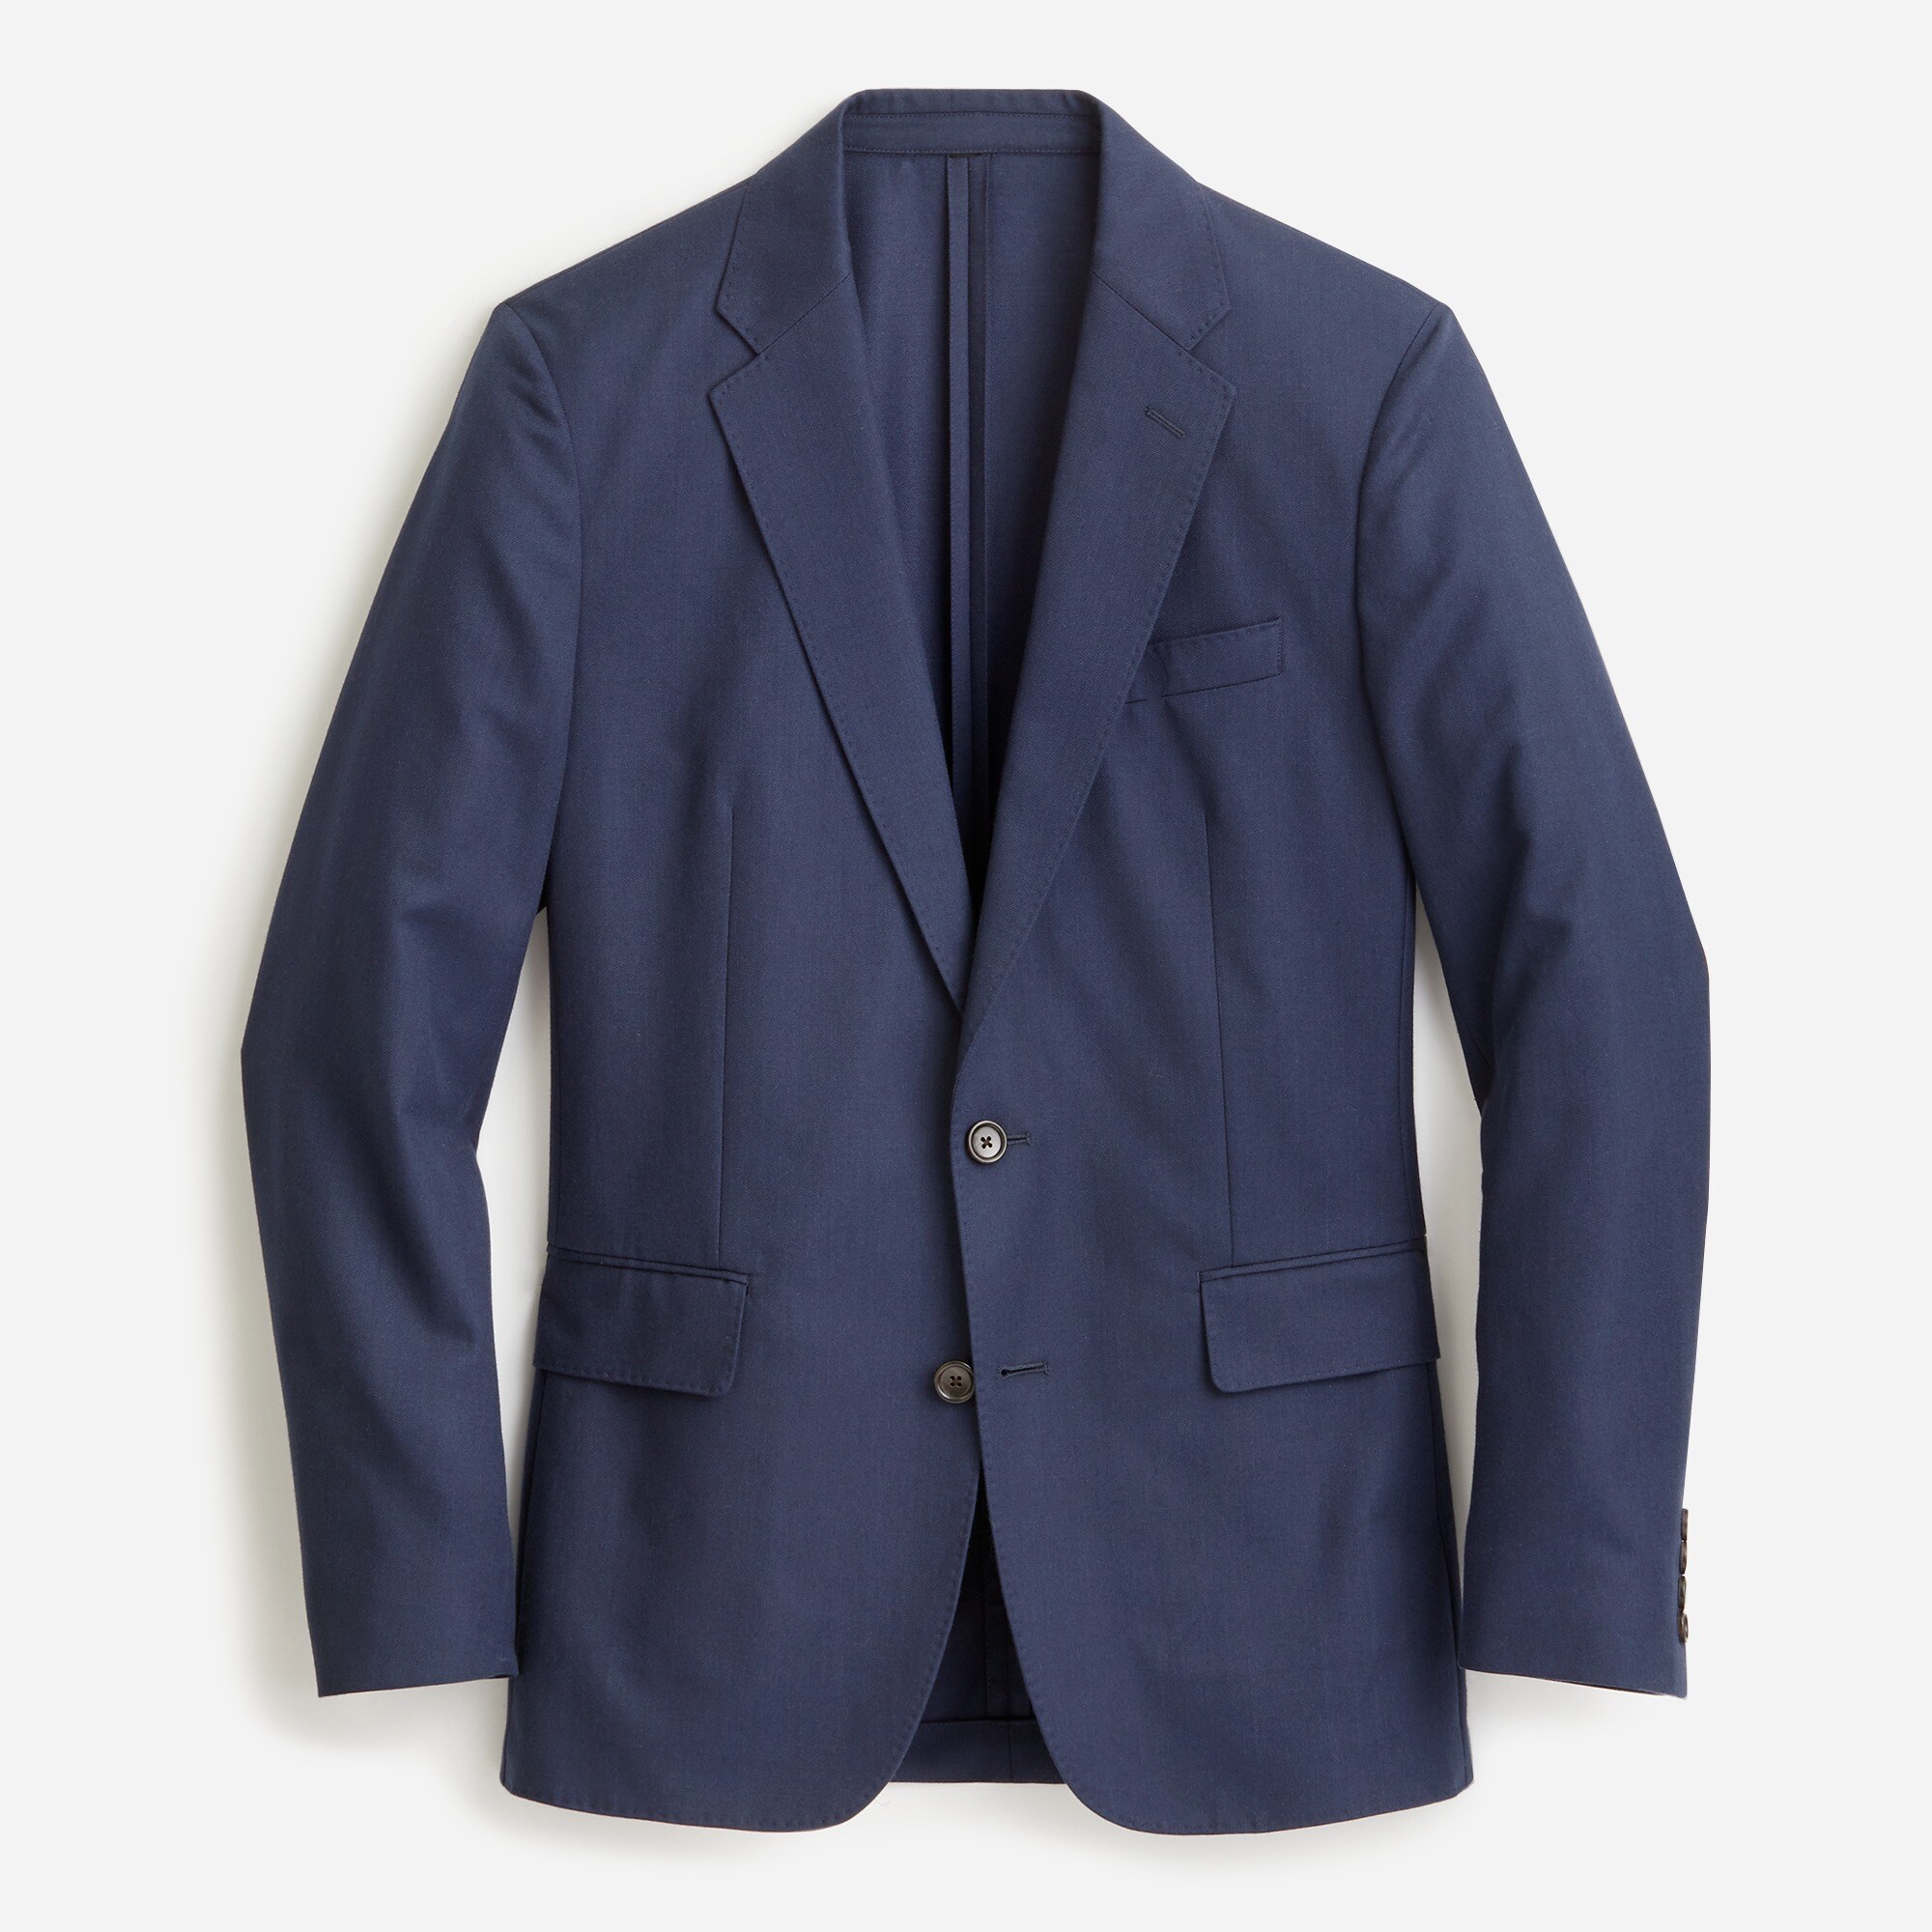  Ludlow Slim-fit unstructured suit jacket in English cotton-wool blend twill